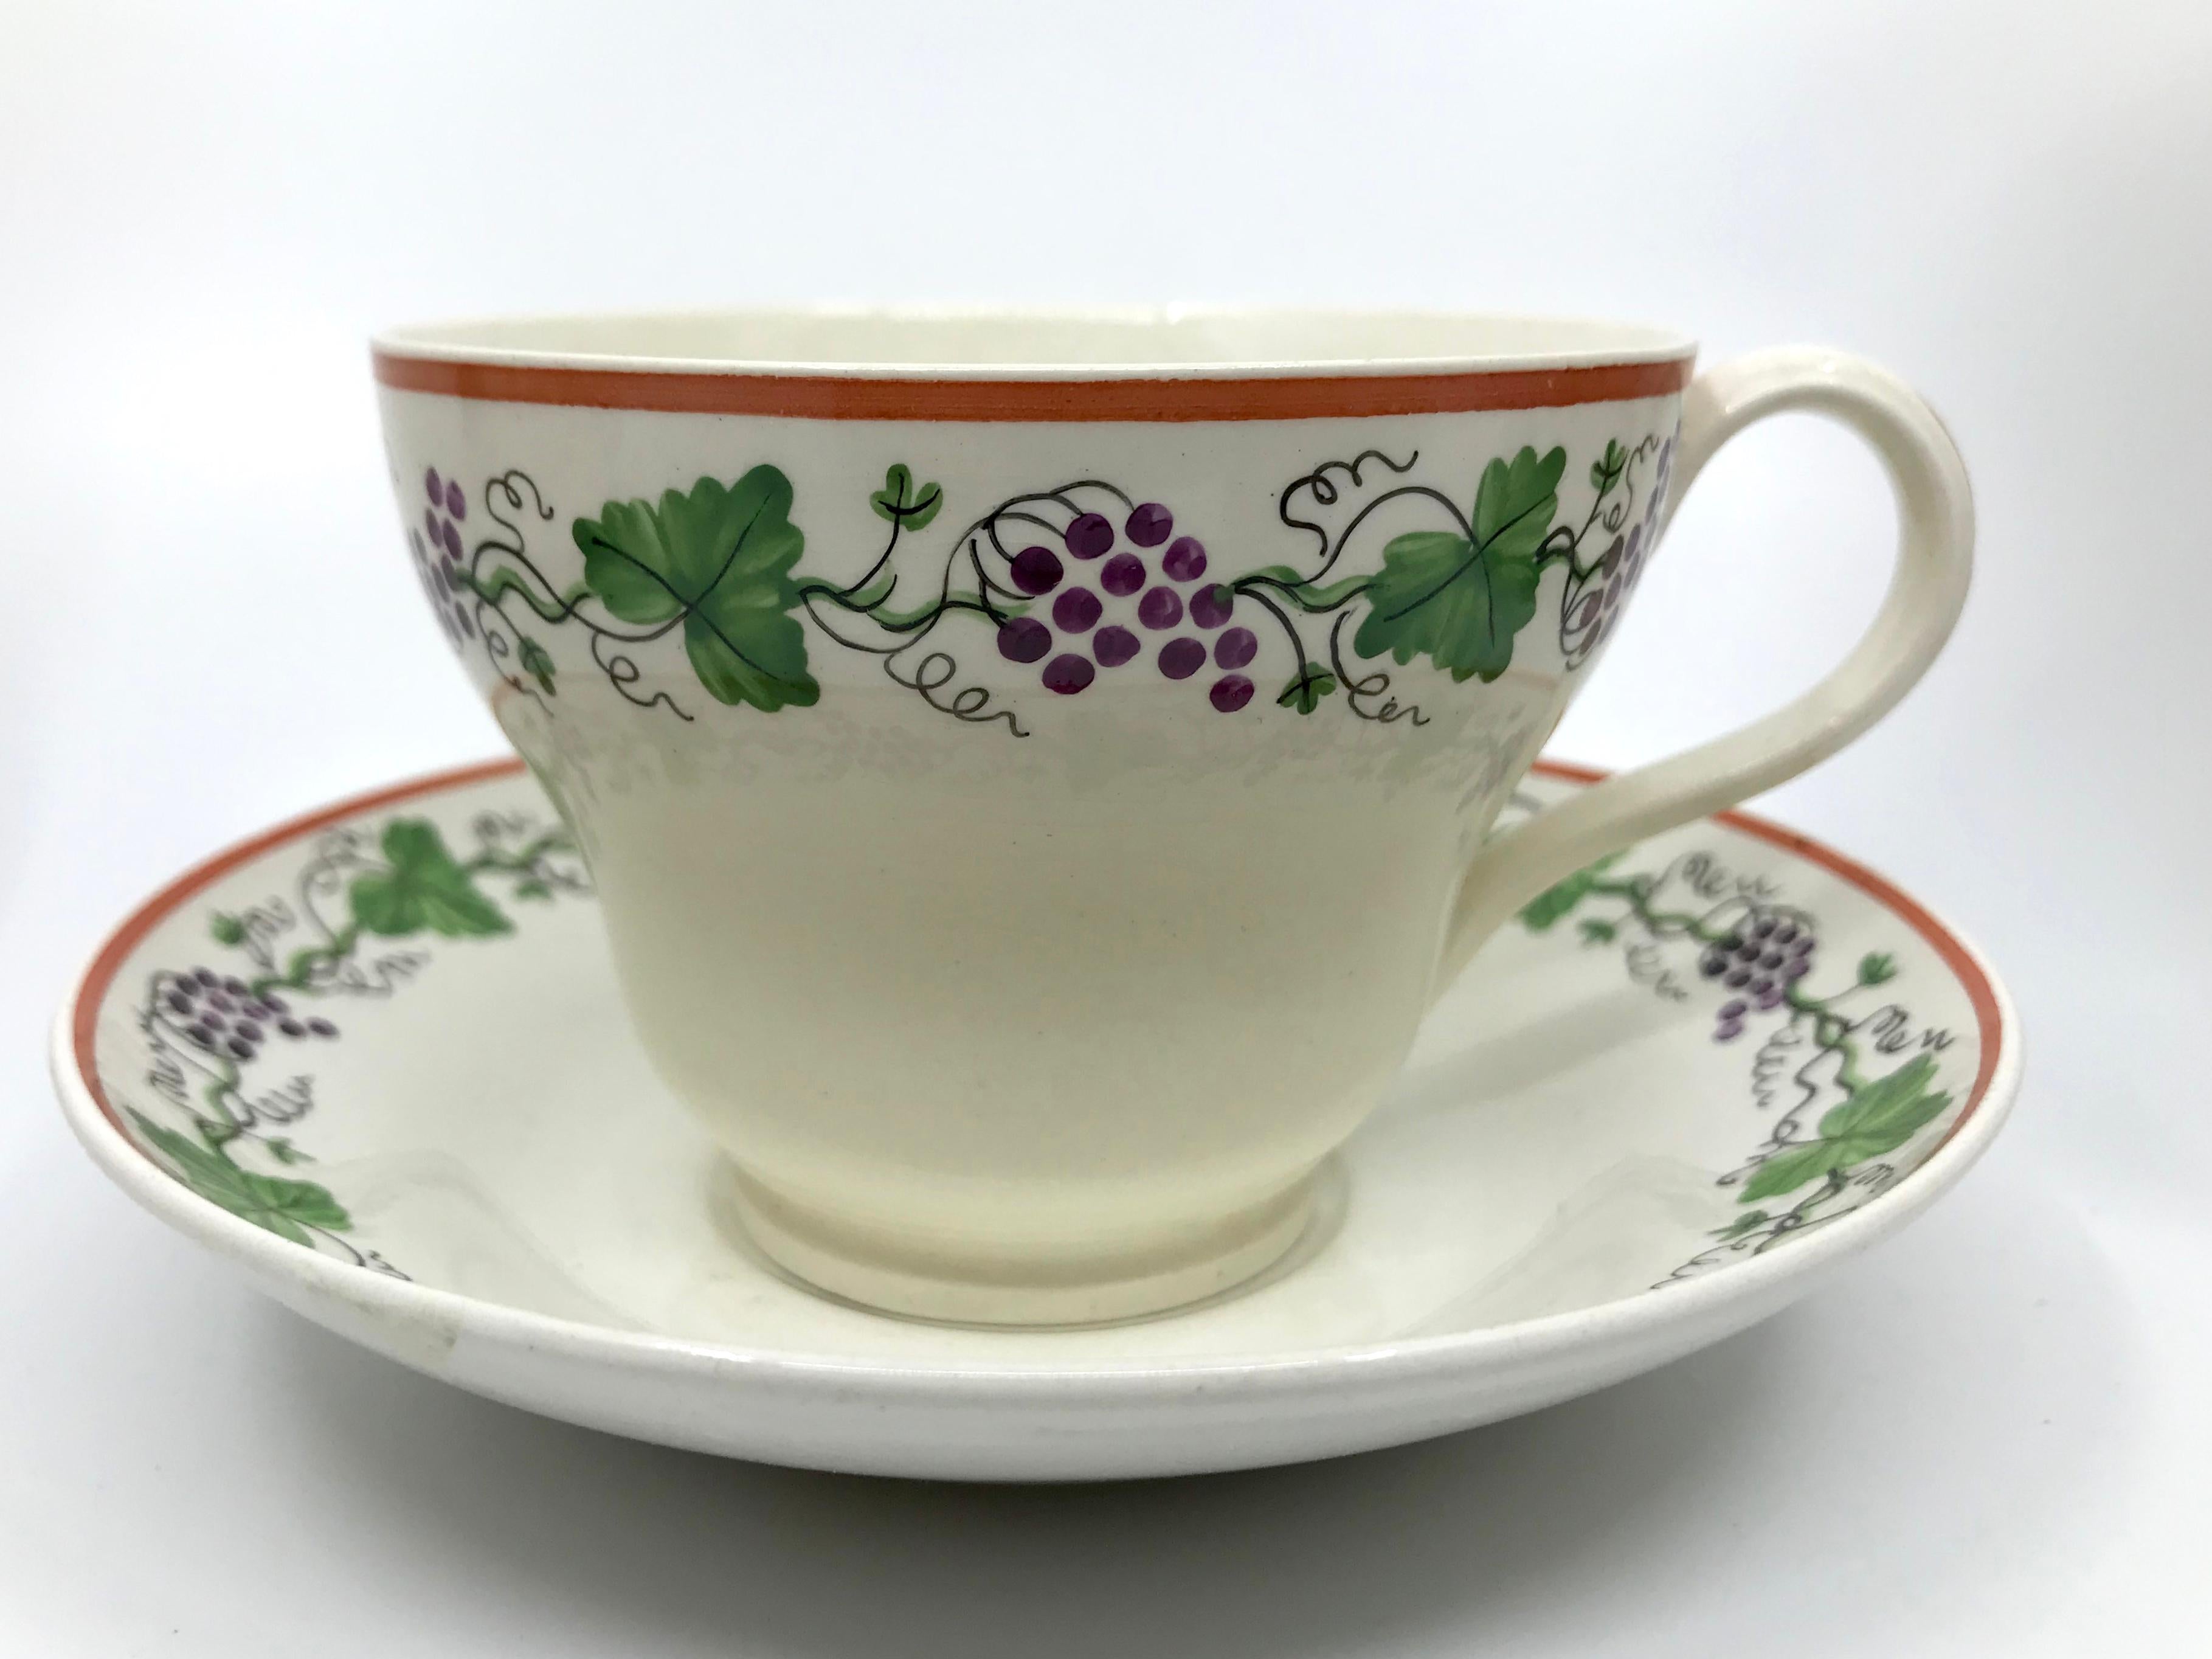 Set of eight Wedgwood creamware grape leaf cups and saucers. Antique creamware cups and saucers with scrolling hand-painted grape vines with green grape leaves, purple grape clusters and red brick rims. England, early 19th century. 
Dimensions: Cup